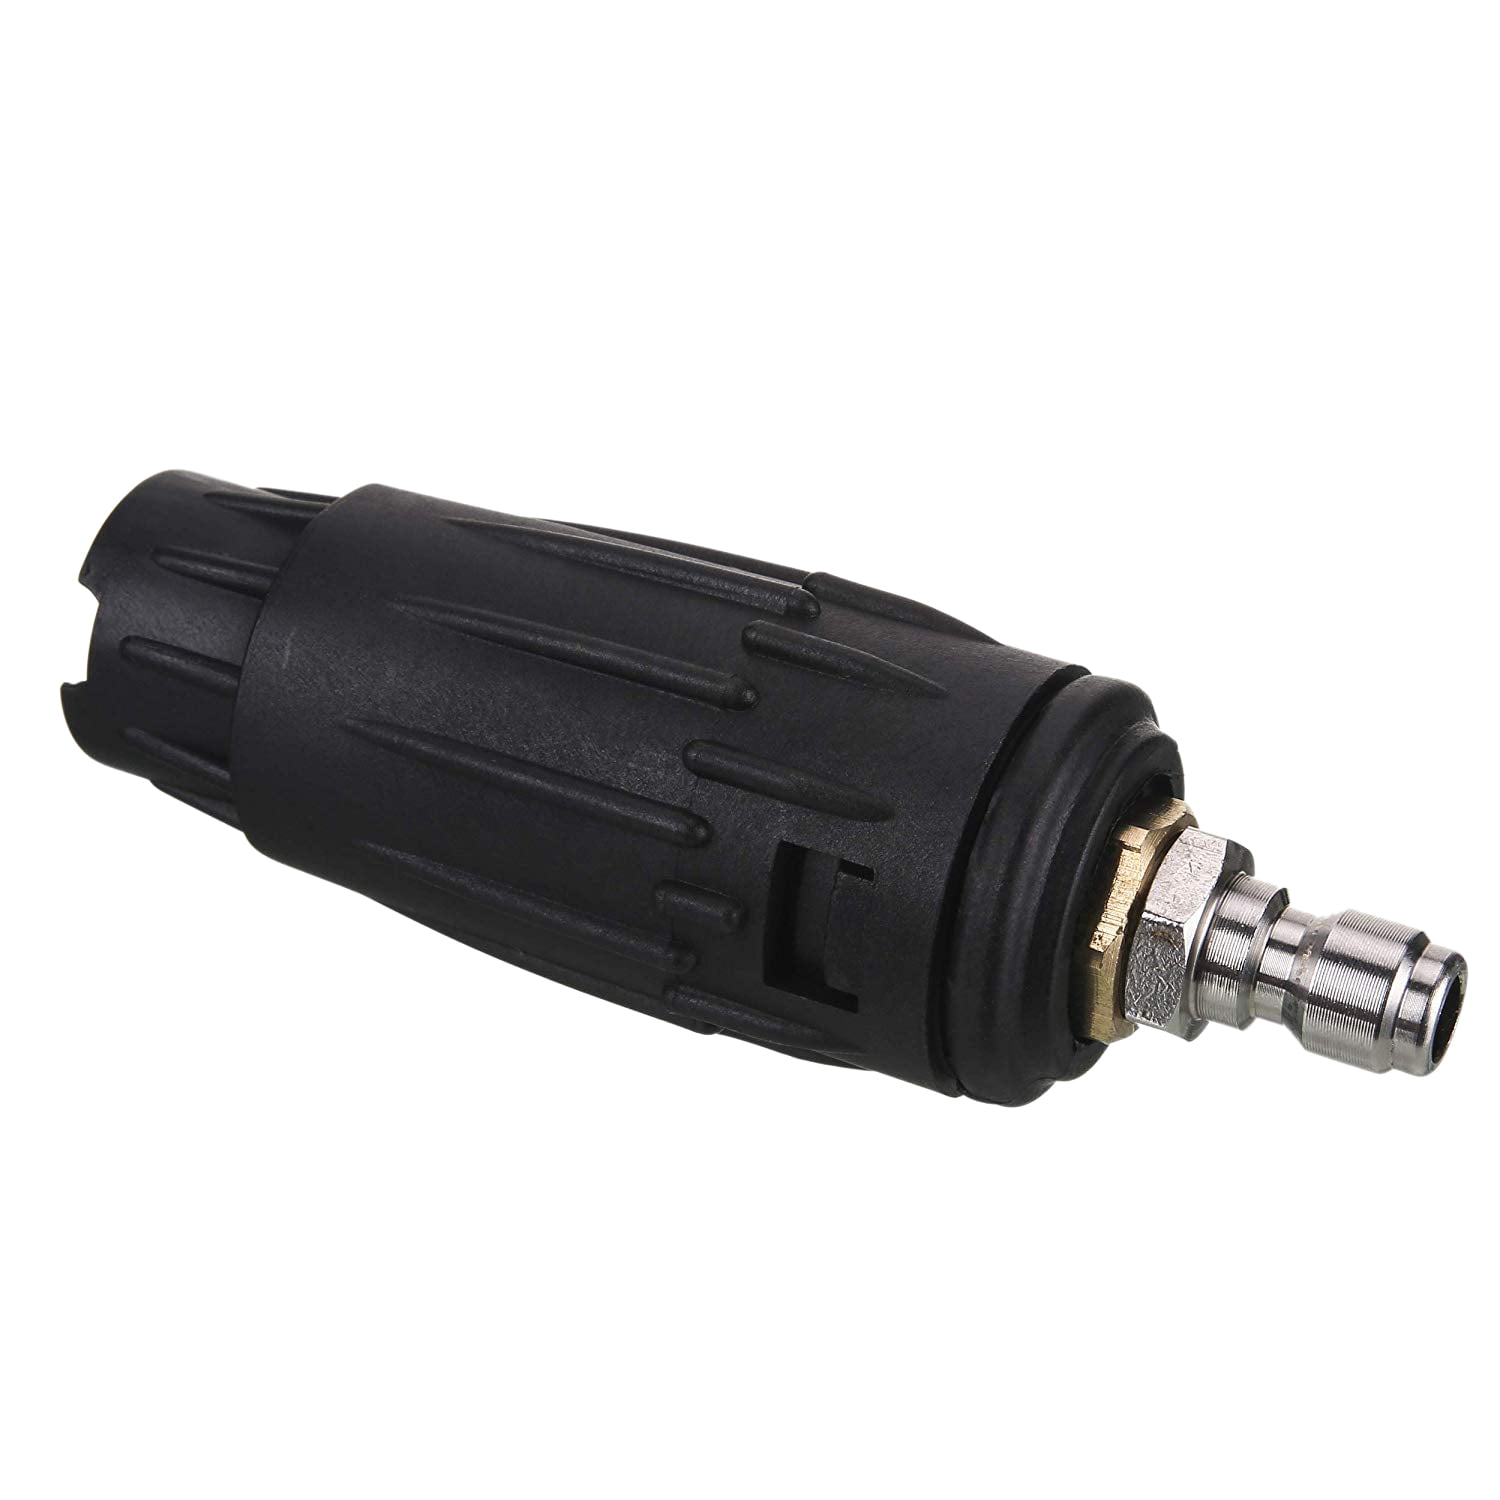 1/4 Inch Quick Connect Plug Variable Spray Pattern 3000 PSI WILTEEXS Adjustable Pressure Washer Nozzle Tips